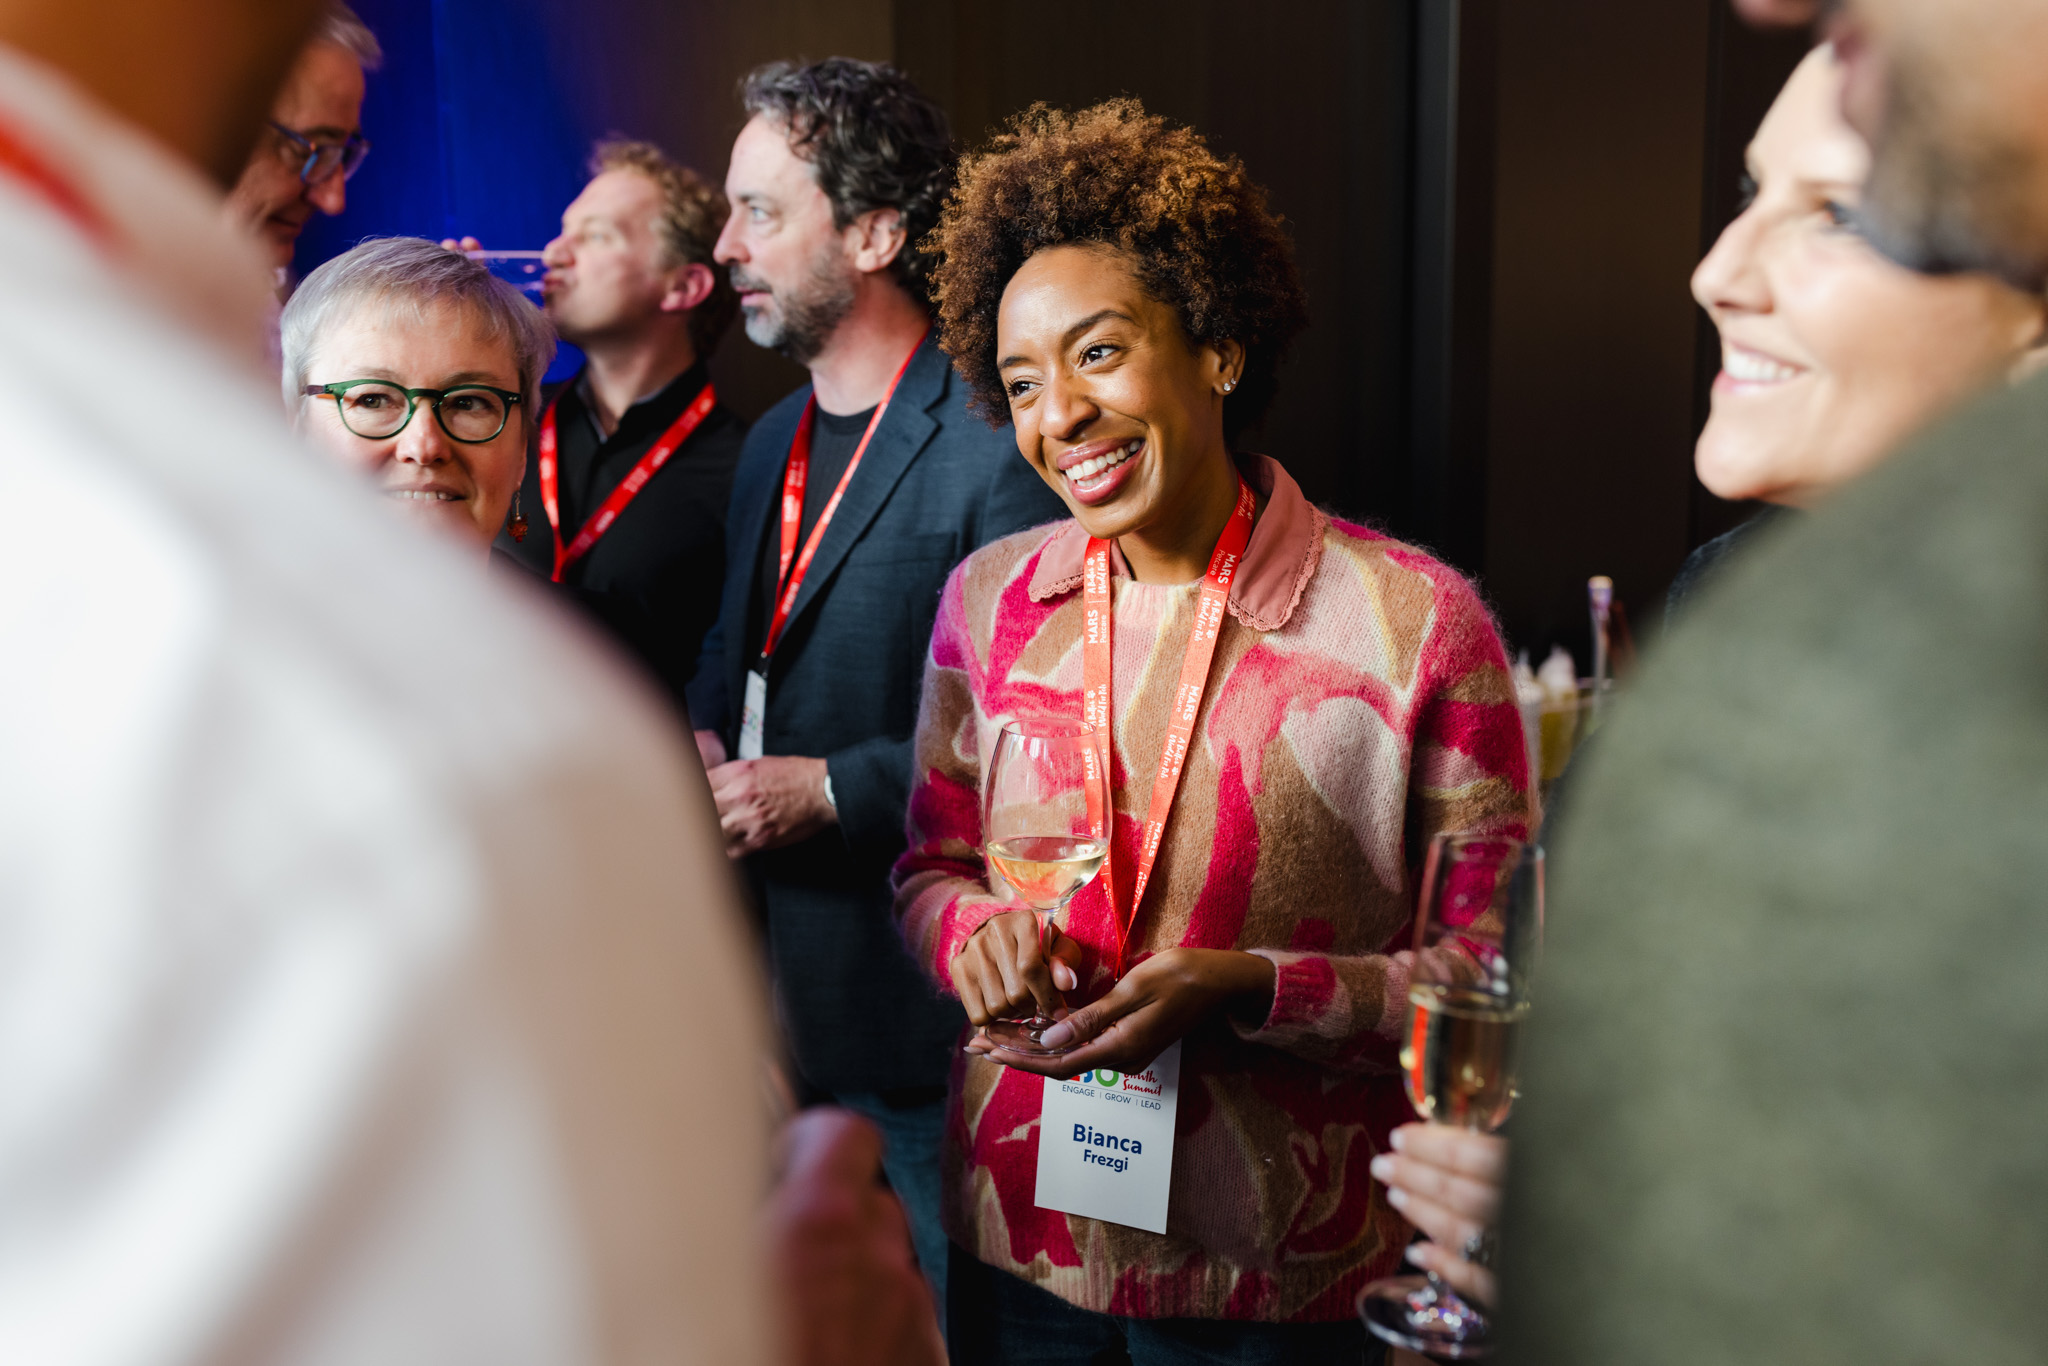 A group of people at a social event. A woman in a pink patterned sweater with a name tag reading "Bianca" is smiling and holding a drink, captured perfectly in this corporate photography session. Others are engaged in conversations around her.